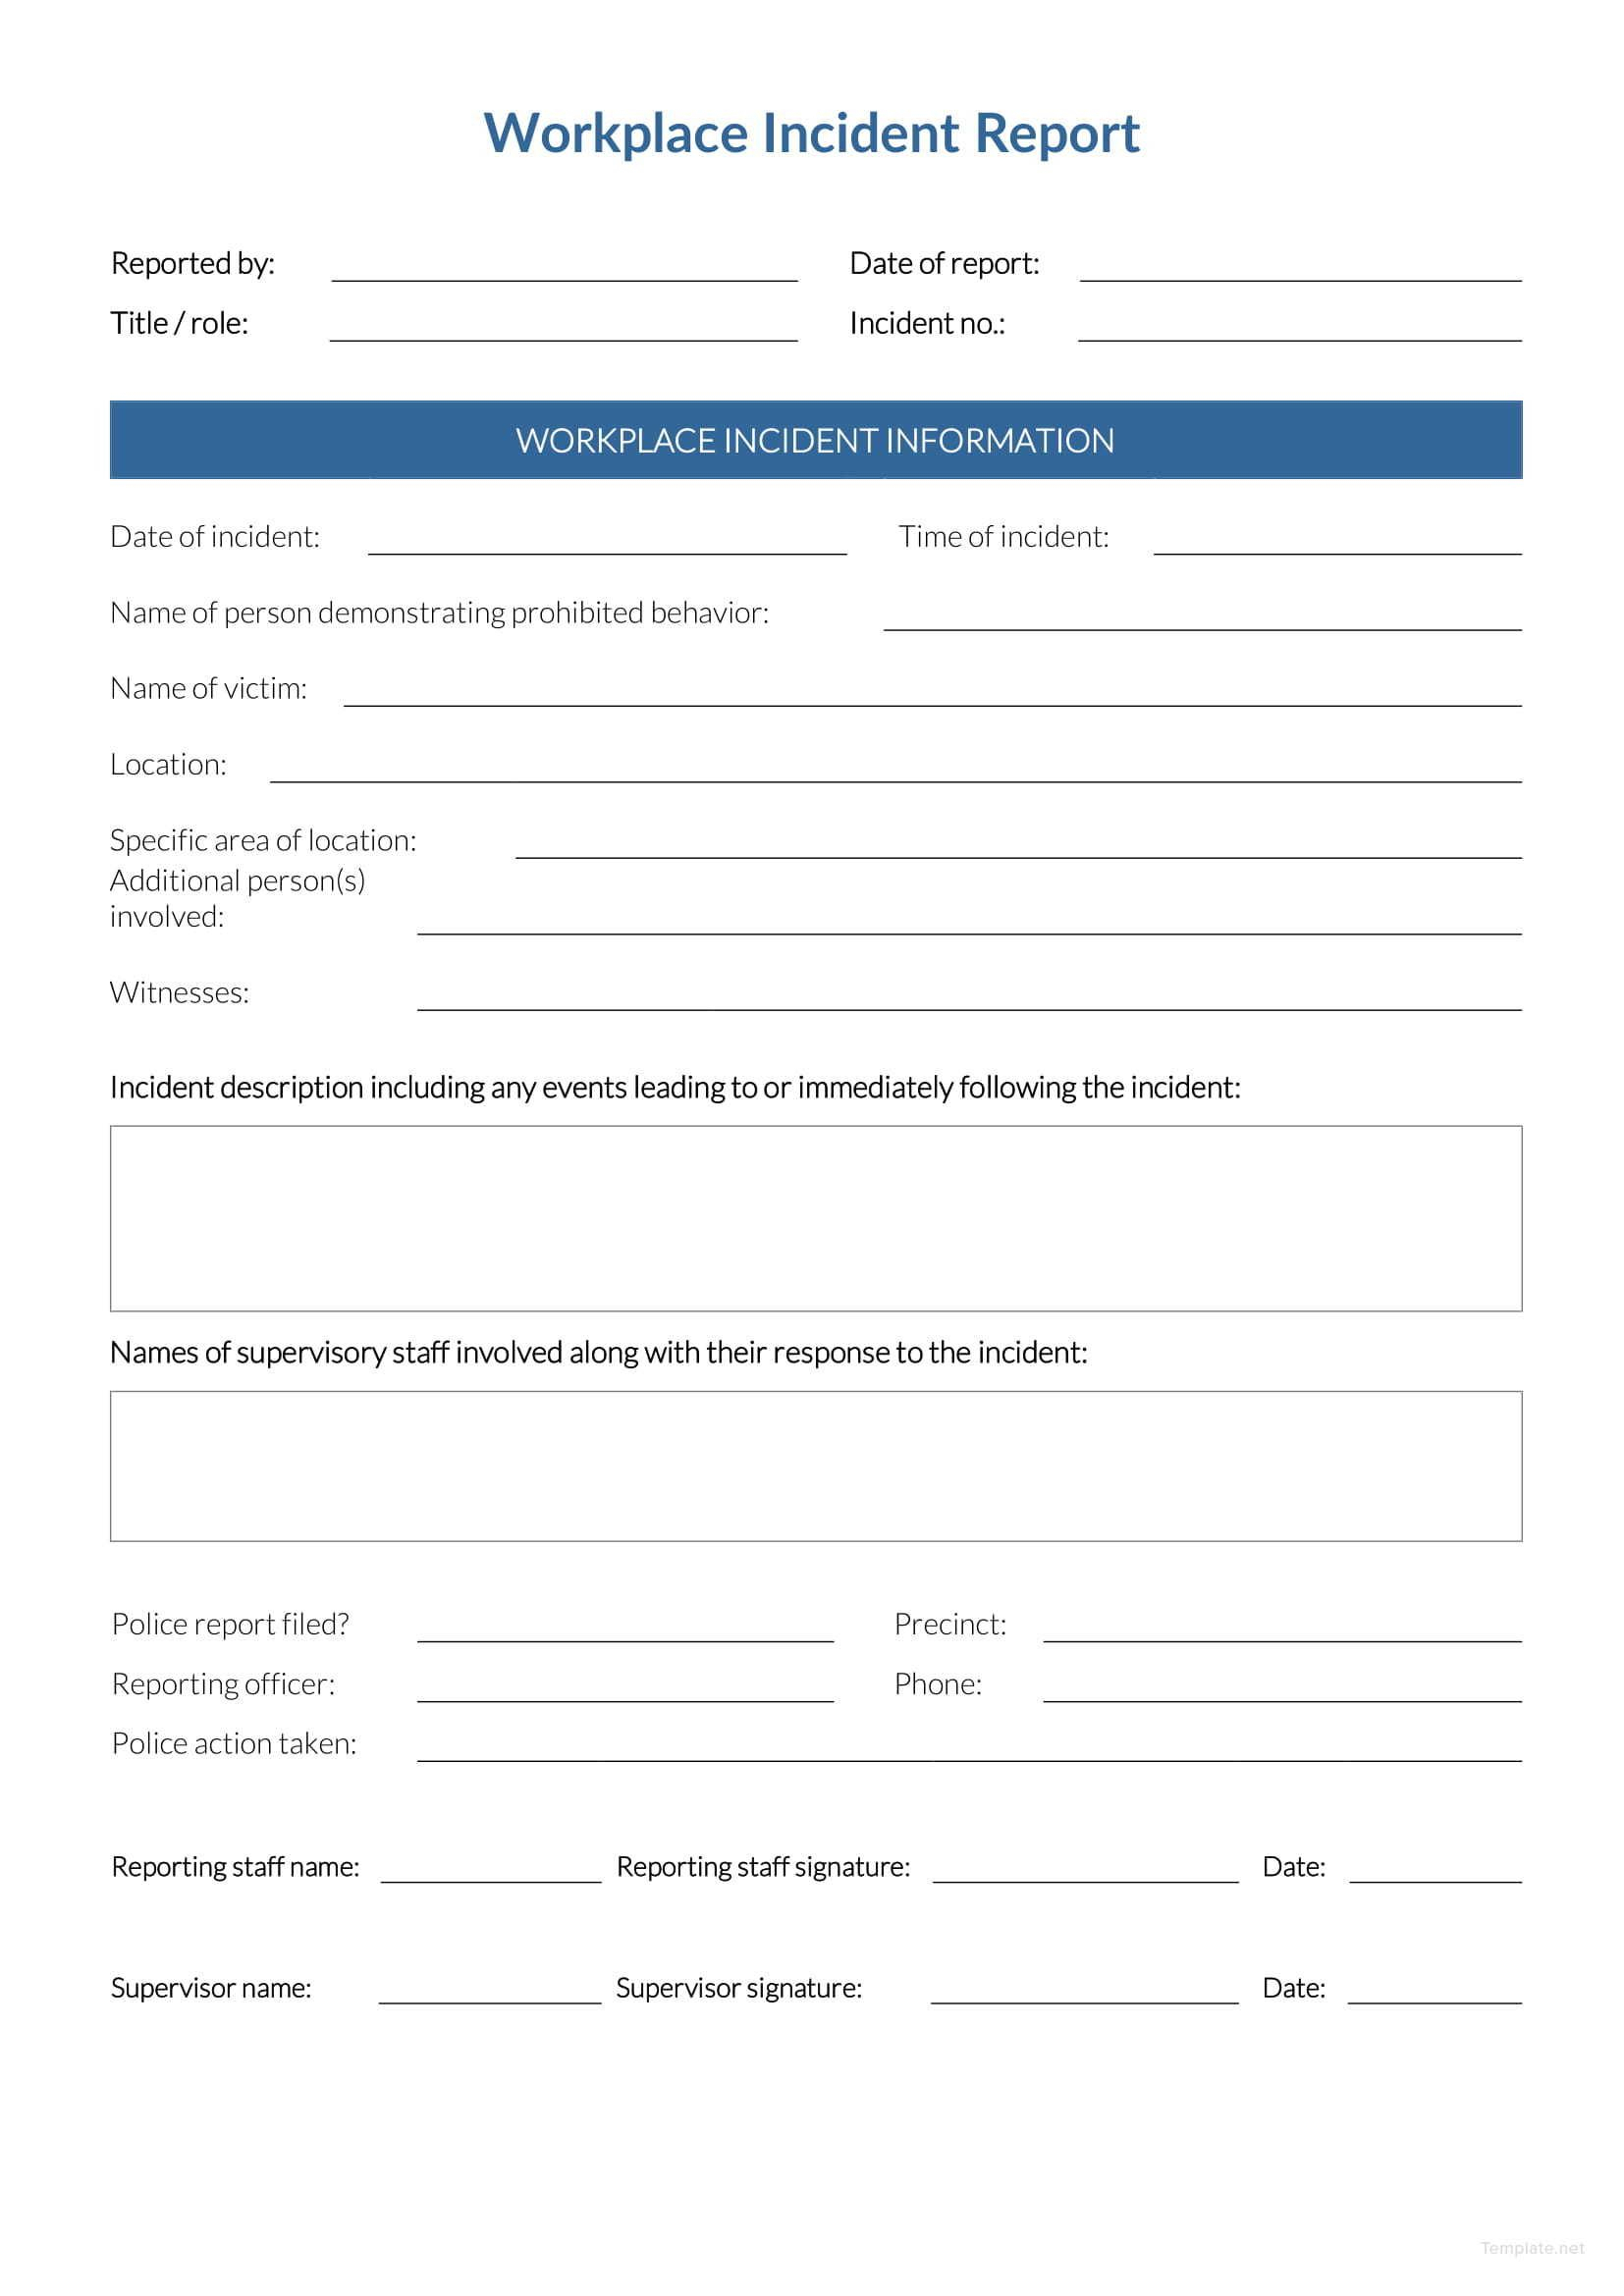 Free Workplace Incident Report | Data Form | Incident Report Within Incident Report Template Itil